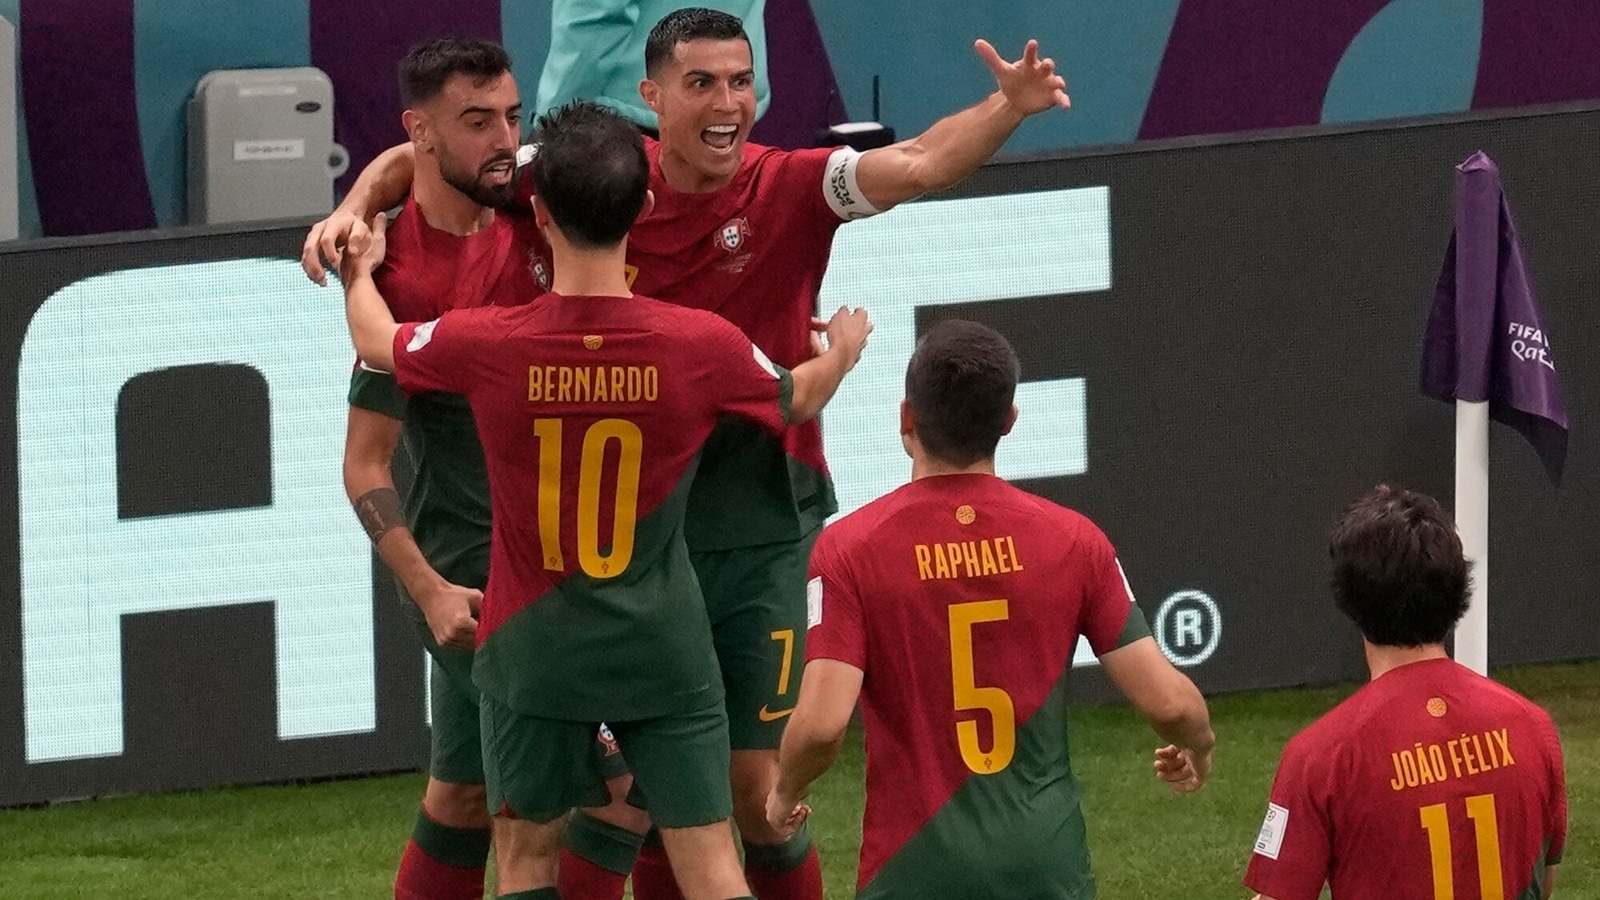 FIFA World Cup 2022 Highlights Portugal vs Uruguay Bruno Fernandes scores twice as POR beat URU to enter Round of 16 Hindustan Times